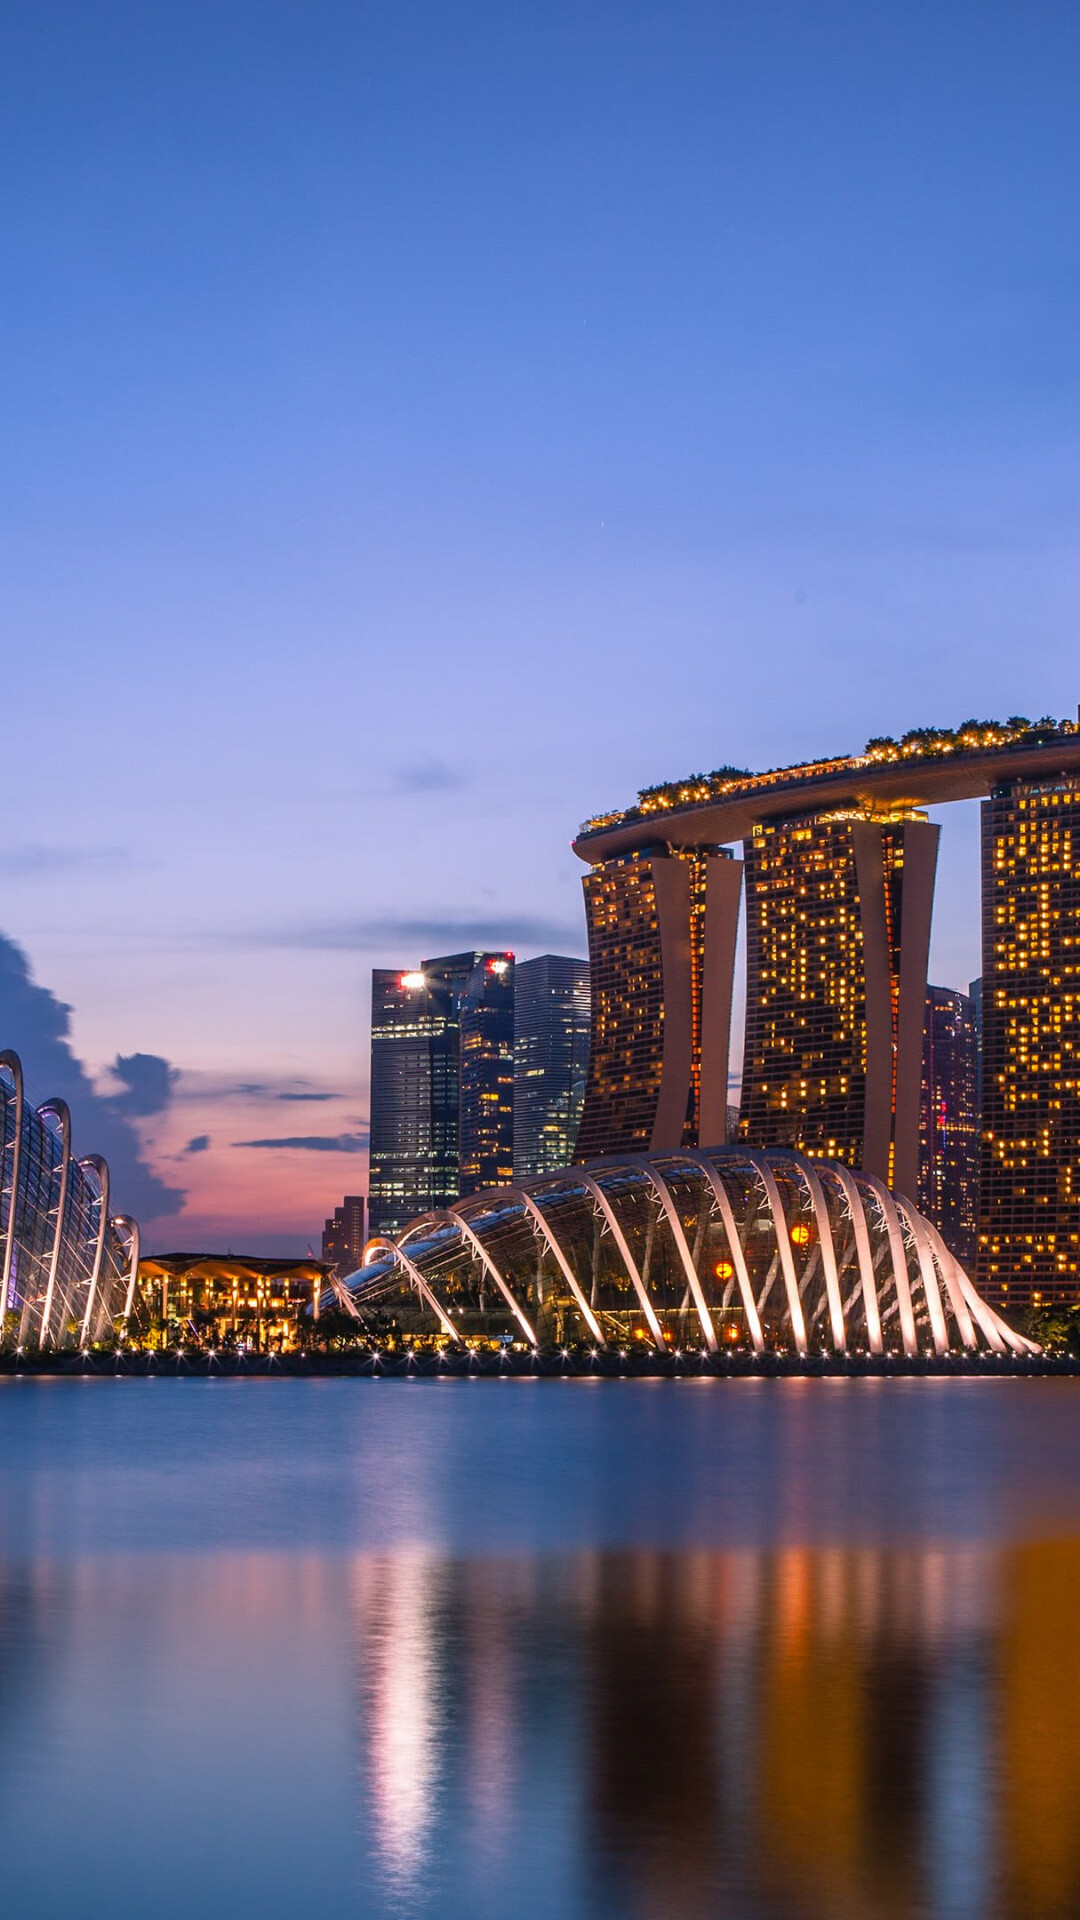 Singapore: Marina Bay Sands, Towering over the bay, Iconic hotel. 1080x1920 Full HD Wallpaper.